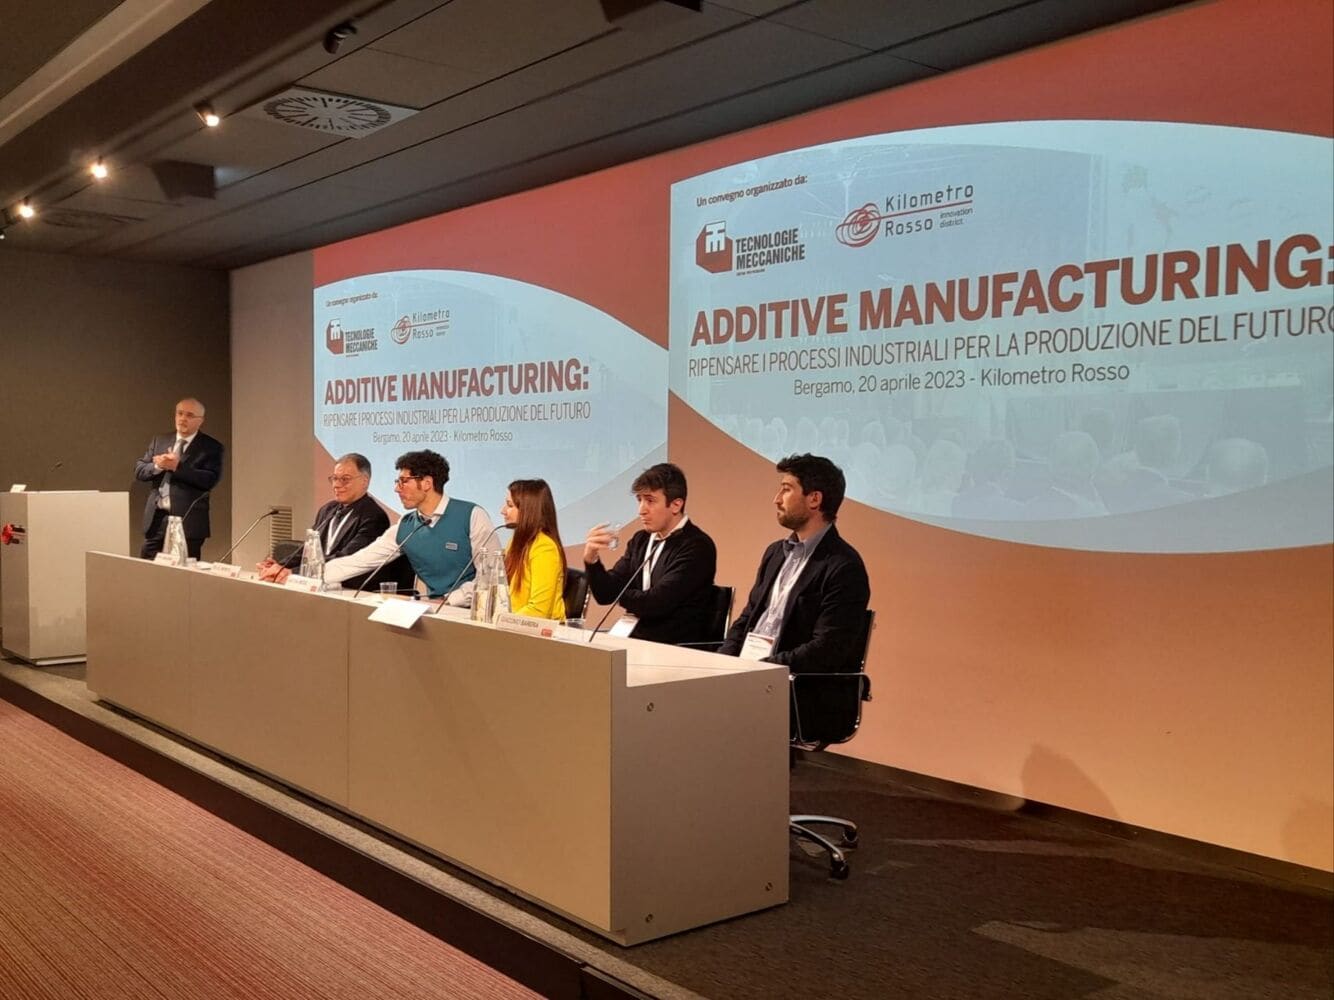 Additive manufacturing: the CMS Kreator case at the Kilometro Rosso Innovation District event